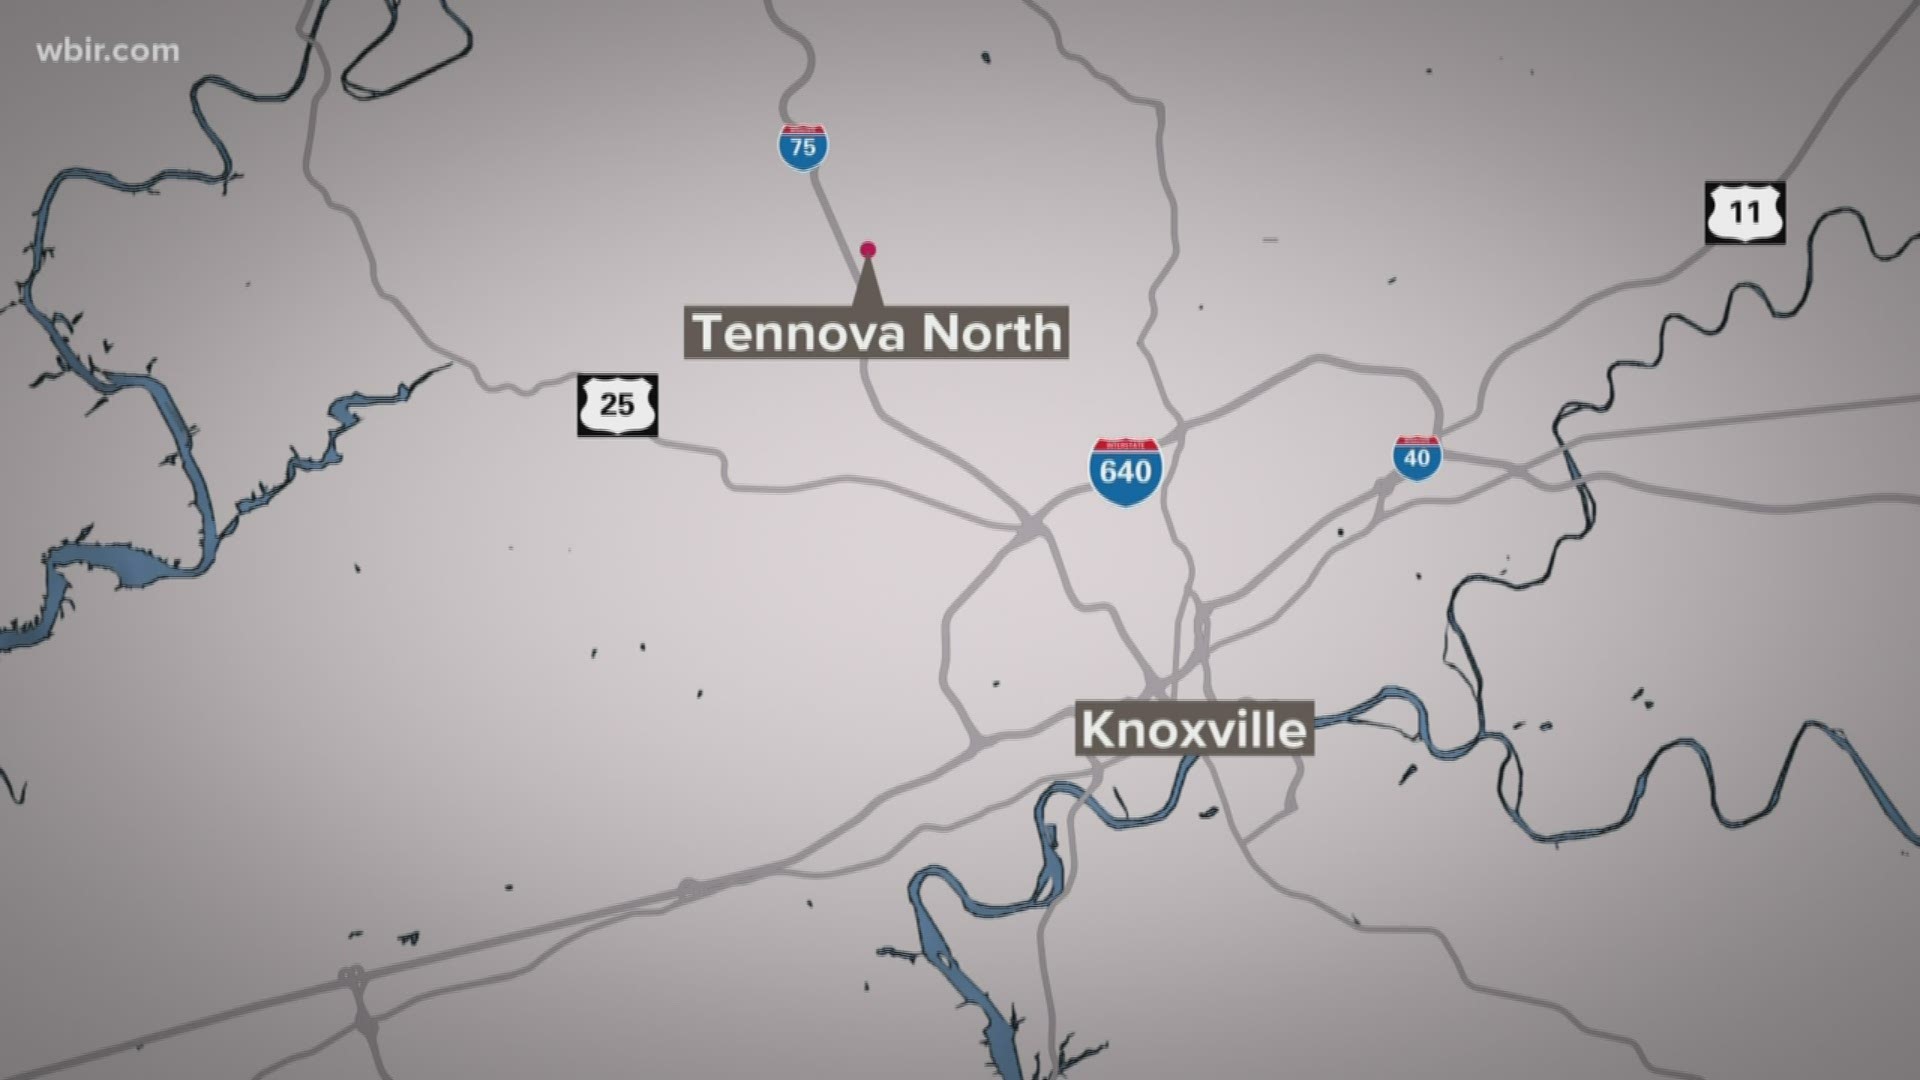 The Knox County Sheriff's Office says one suspect was found and taken into custody after a shooting victim showed up to Tennova North Saturday afternoon. The shooting suspect says they acted in "self-defense," according to KCSO.